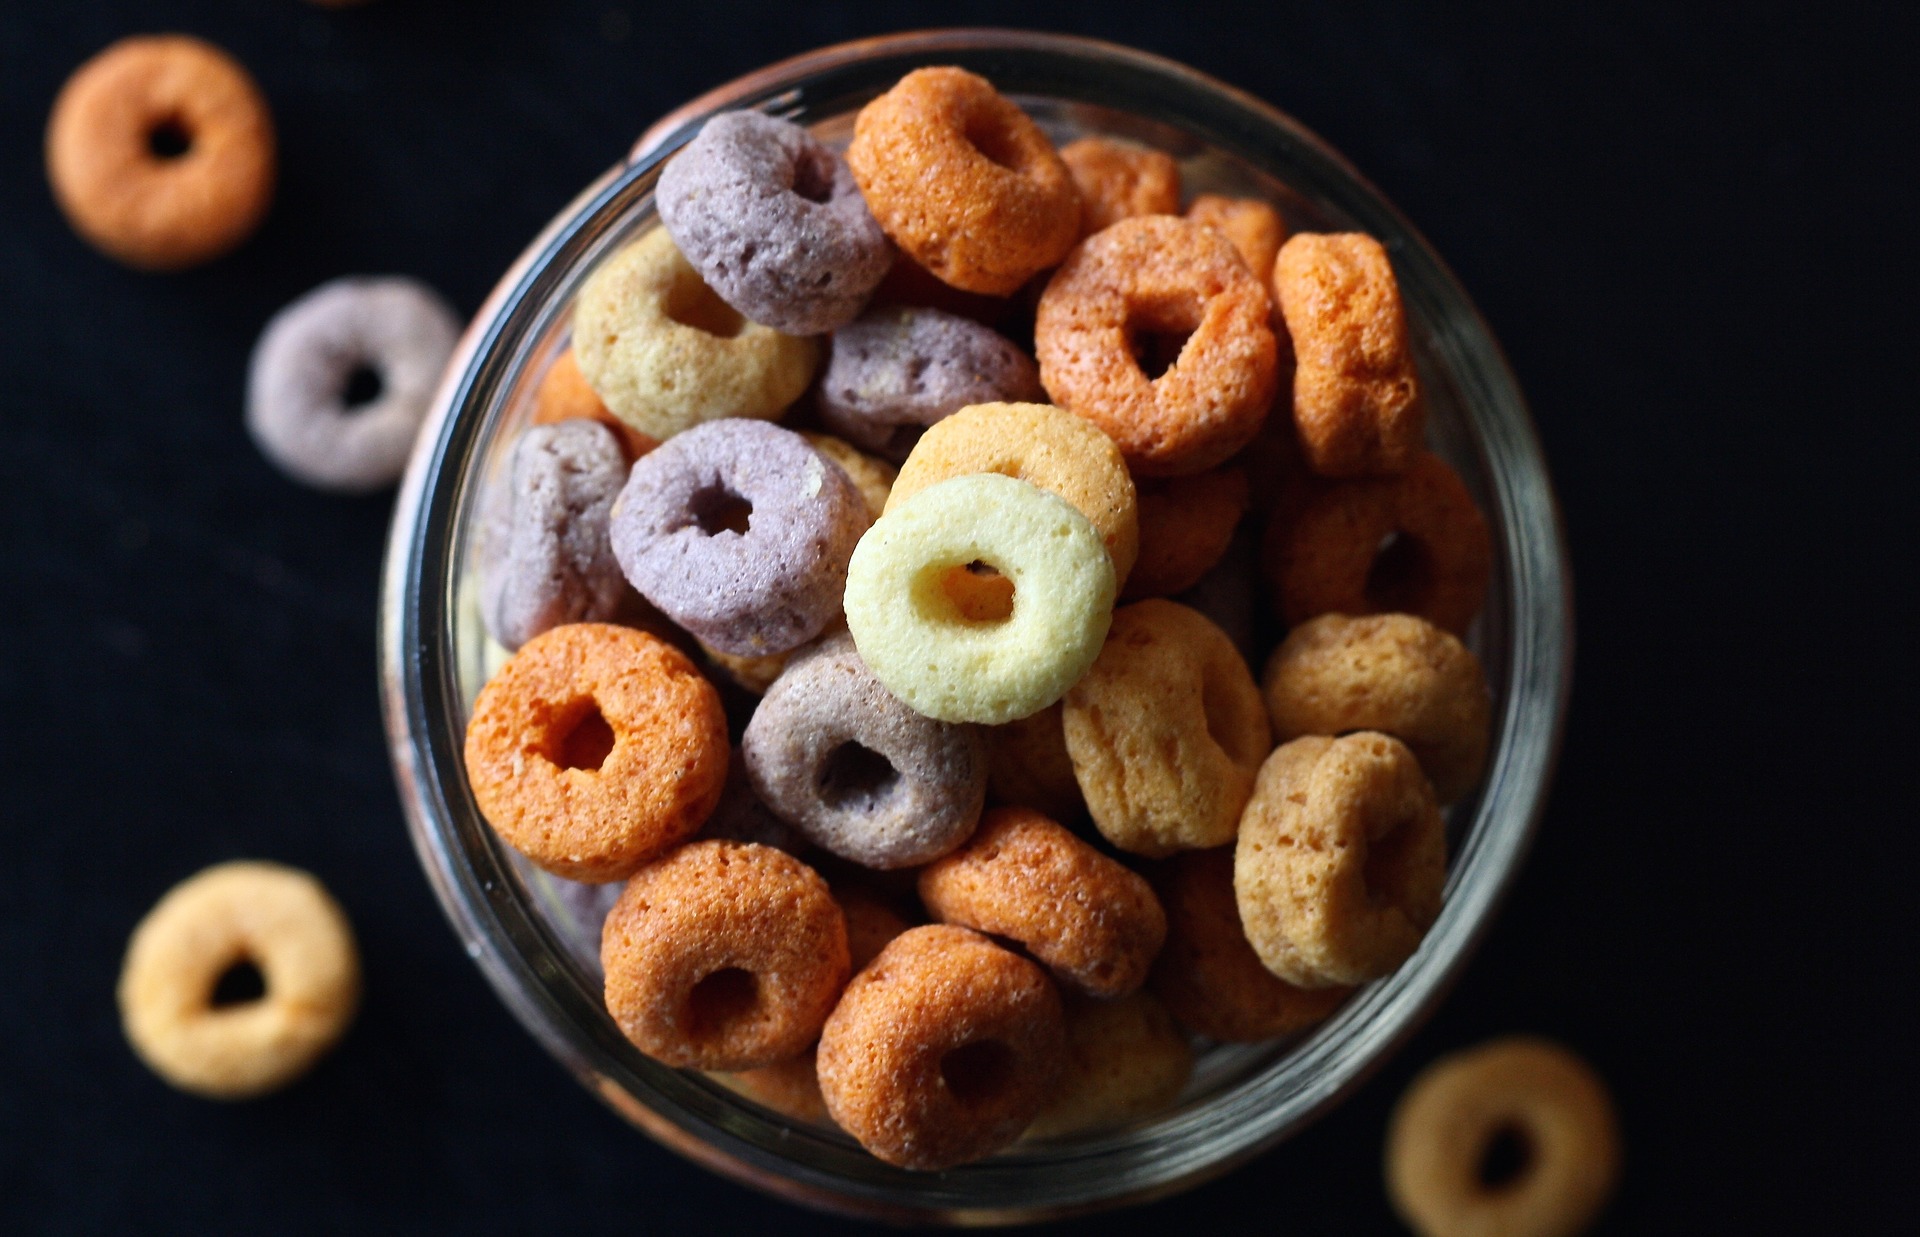 Are Cheerios Healthy? Nutrients, Flavors, and More